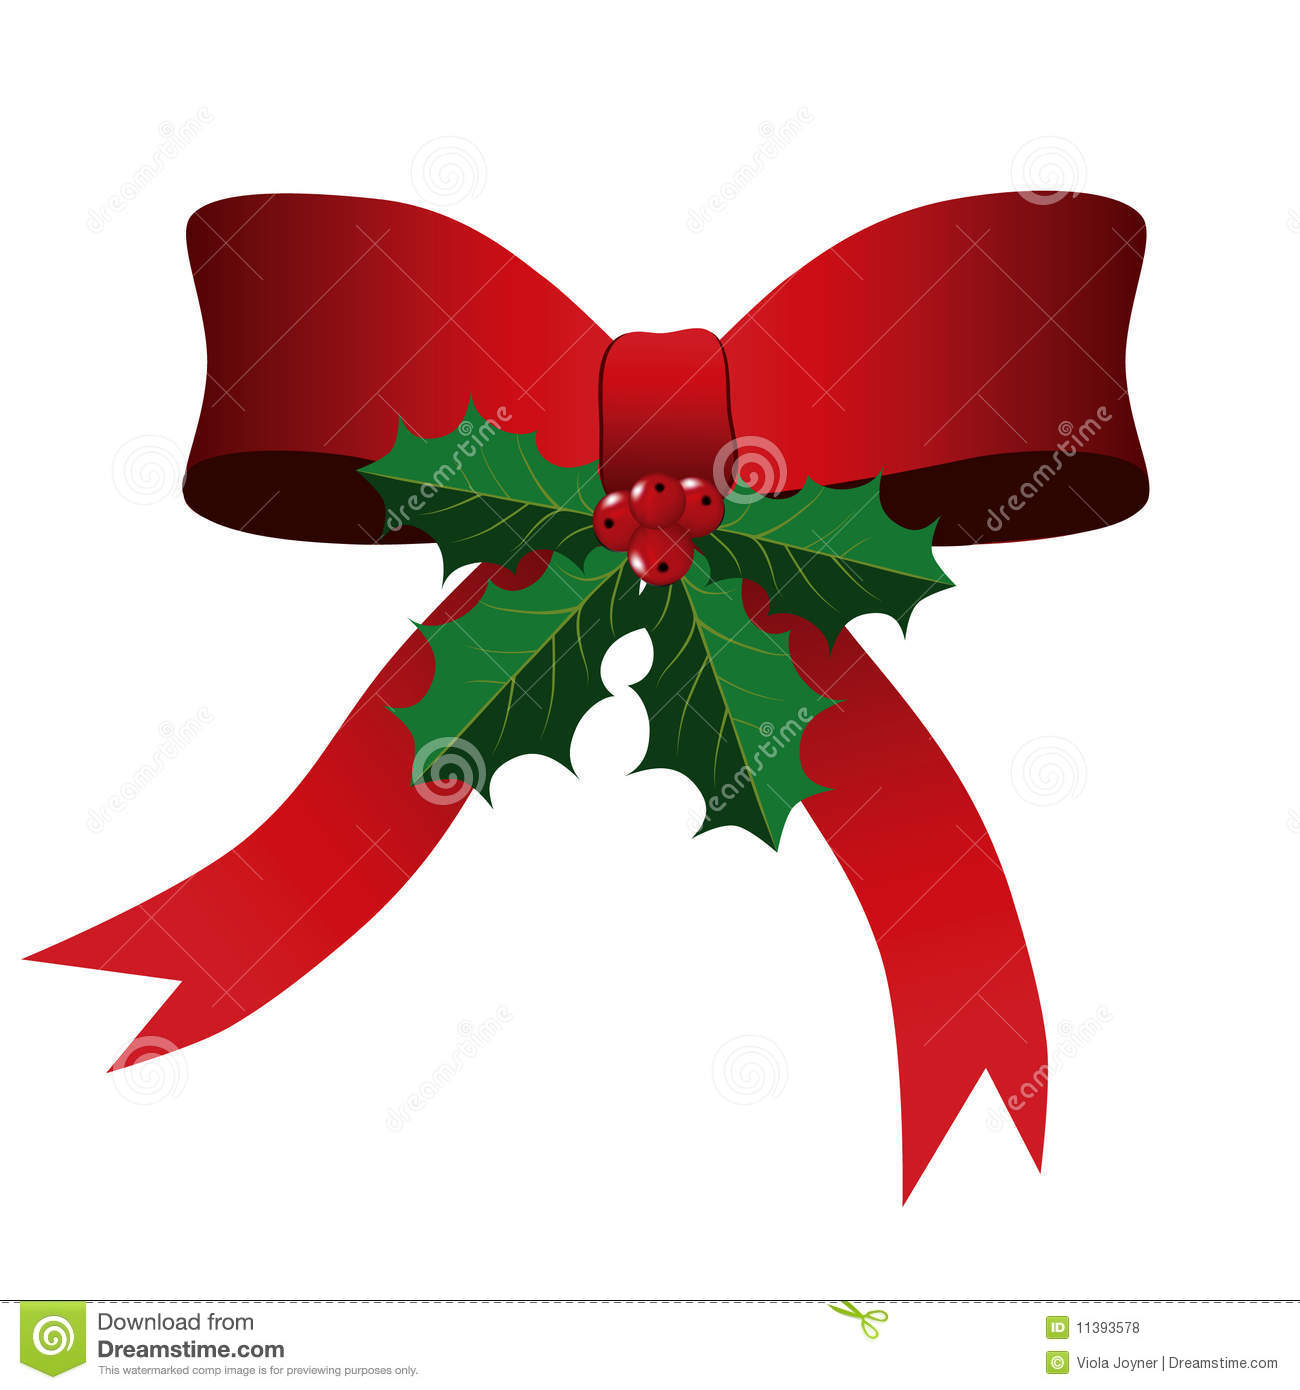 Red Bow With Green Holly Leaves And Berries Against A White Background